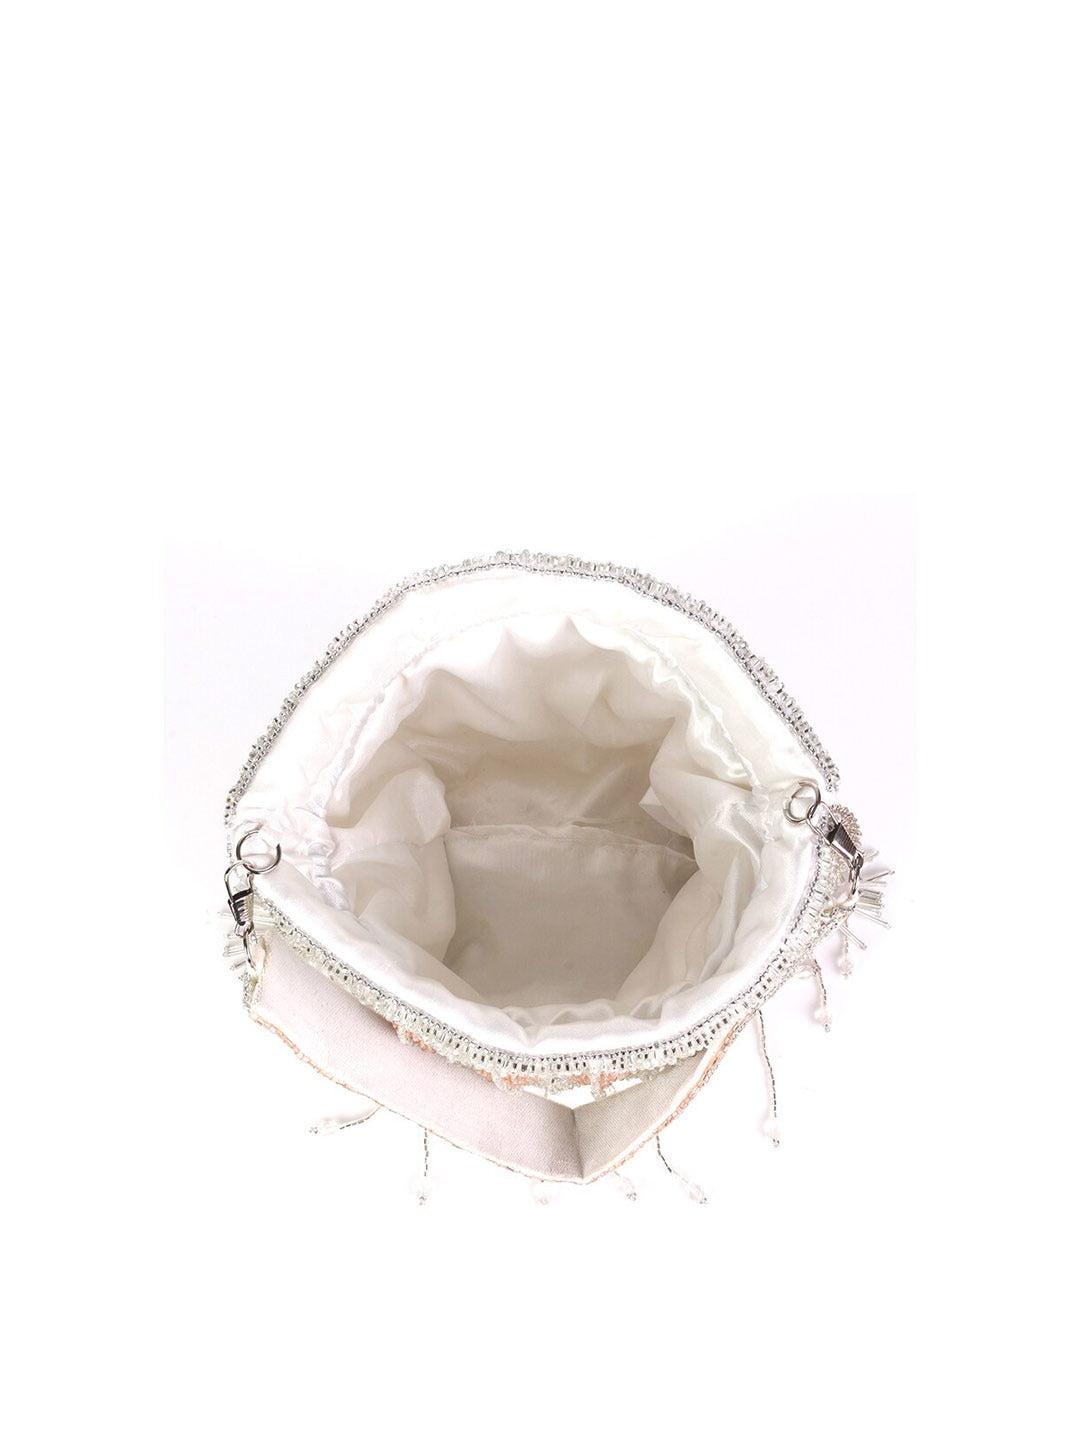 Silver-Toned & Peach-Coloured Embellished Potli Clutch